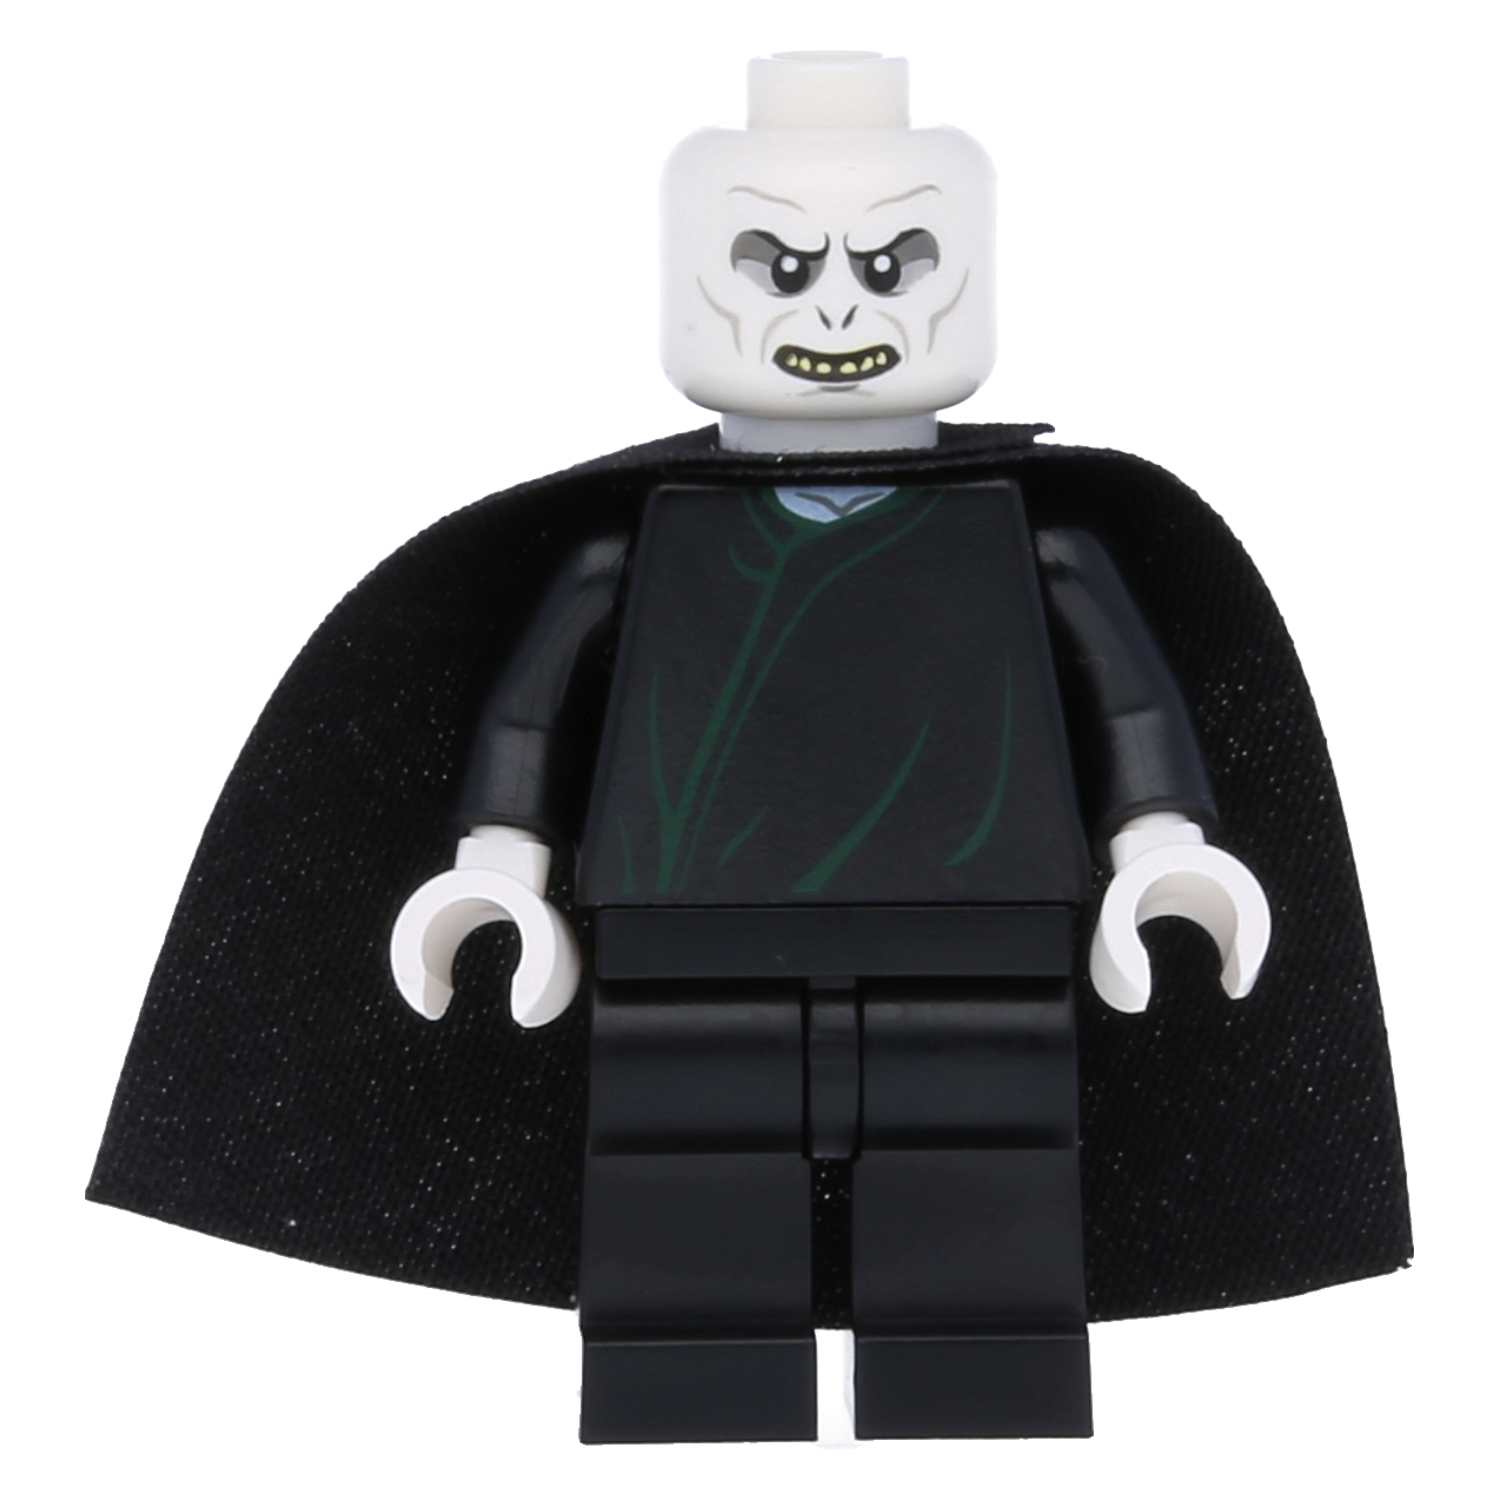 Lego Harry Potter Minifigure - Lord Voldemort with black cloak